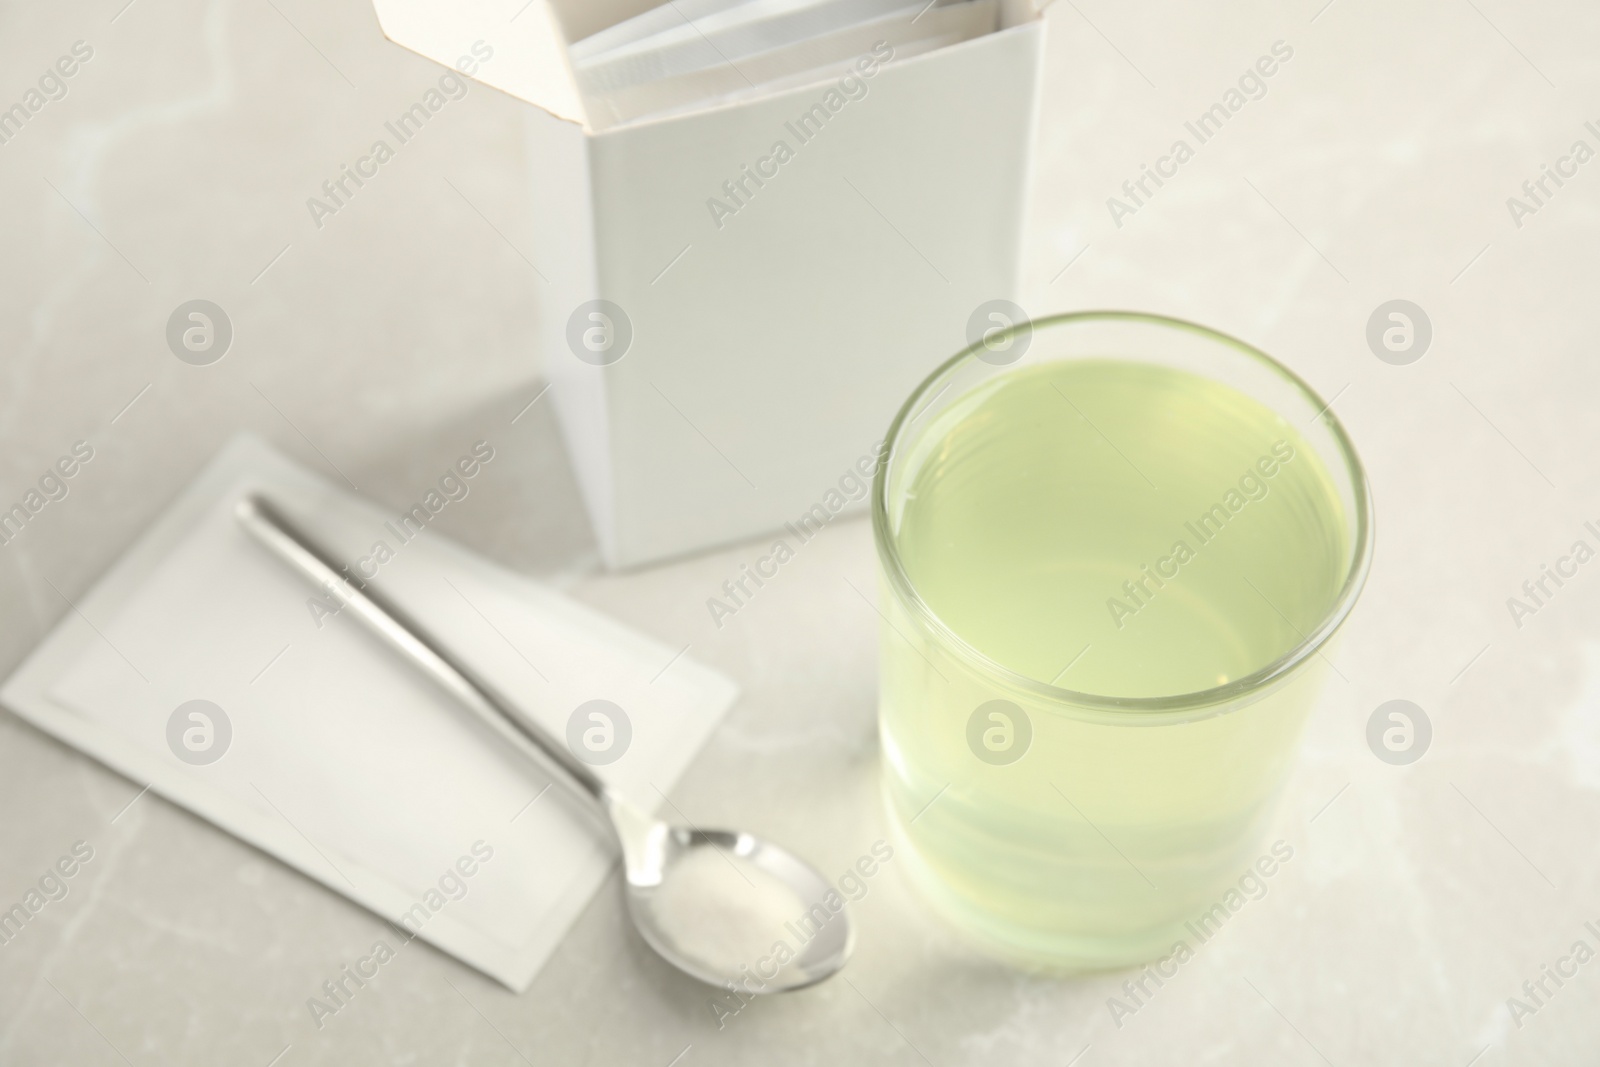 Photo of Medicine sachet, spoon and glass with dissolved drug on table indoors